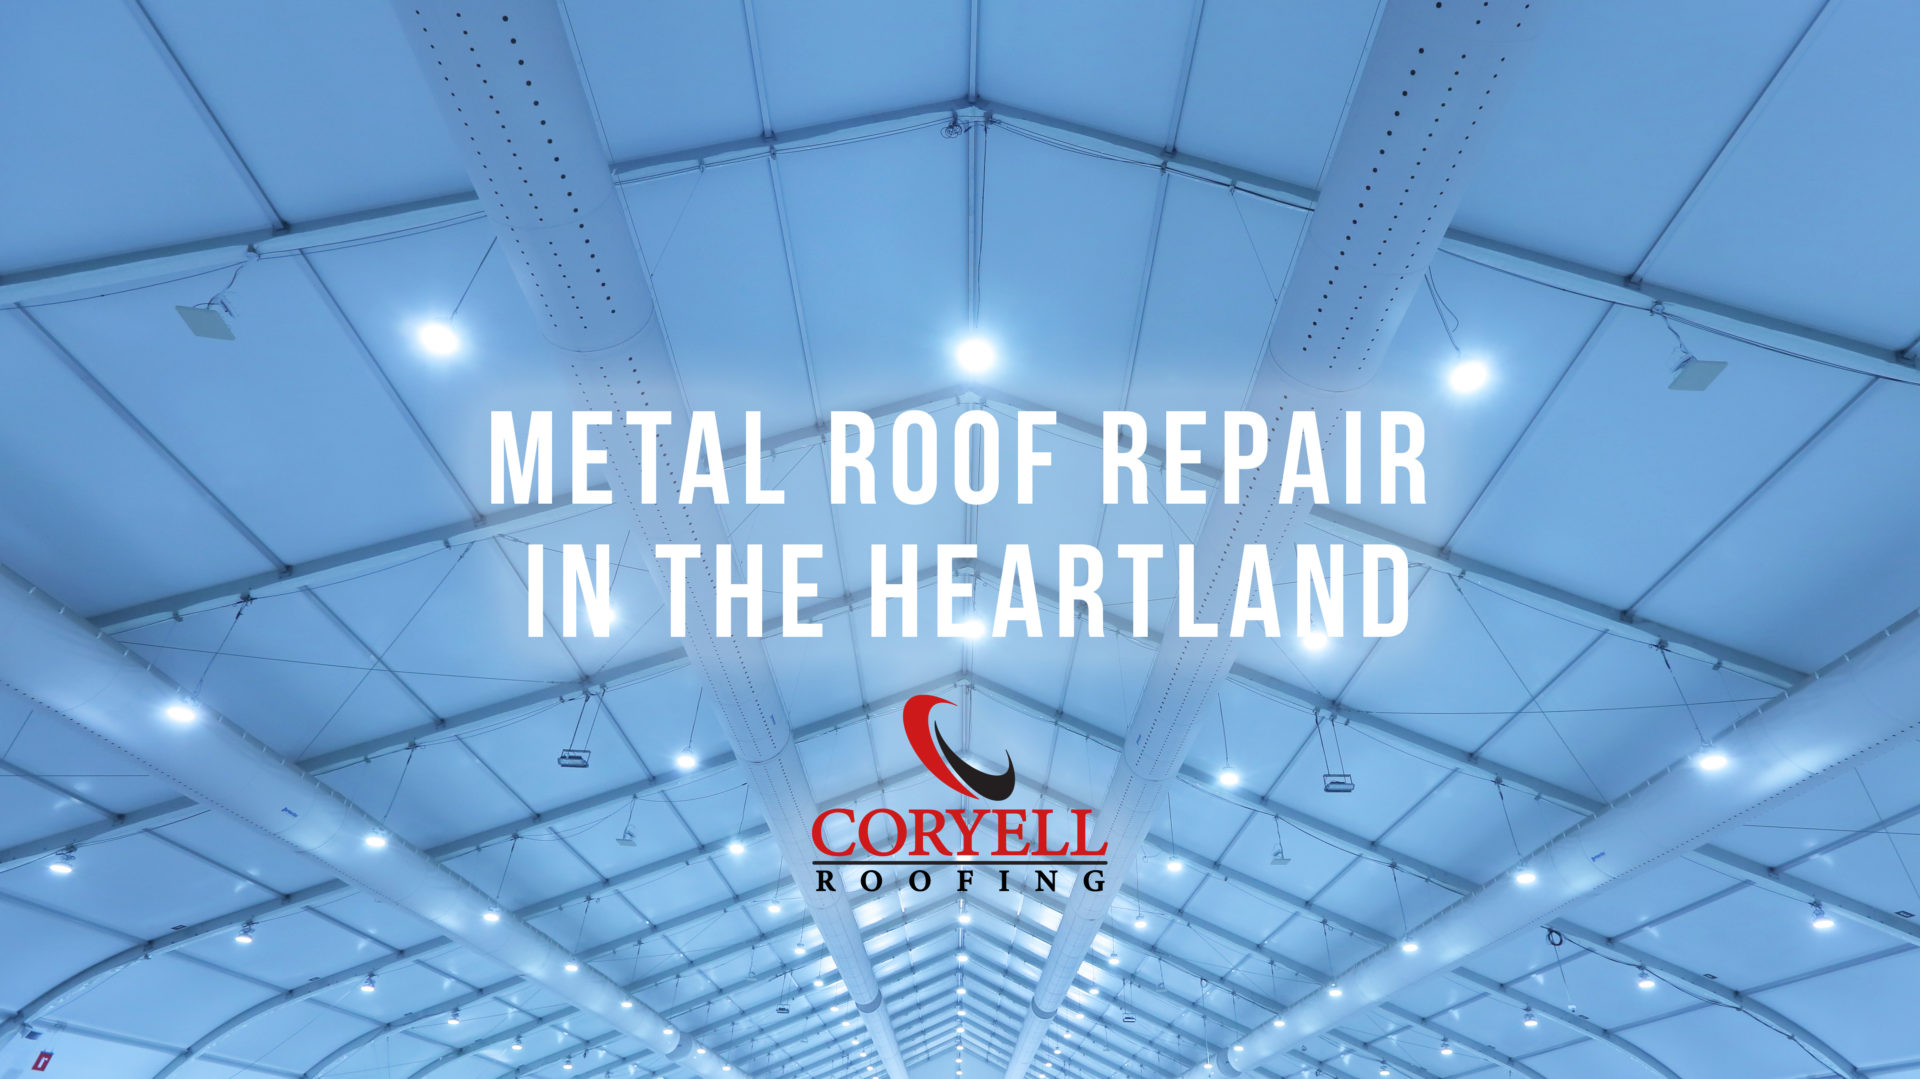 Metal Roof Repair in the Heartland | Coryell Roofing